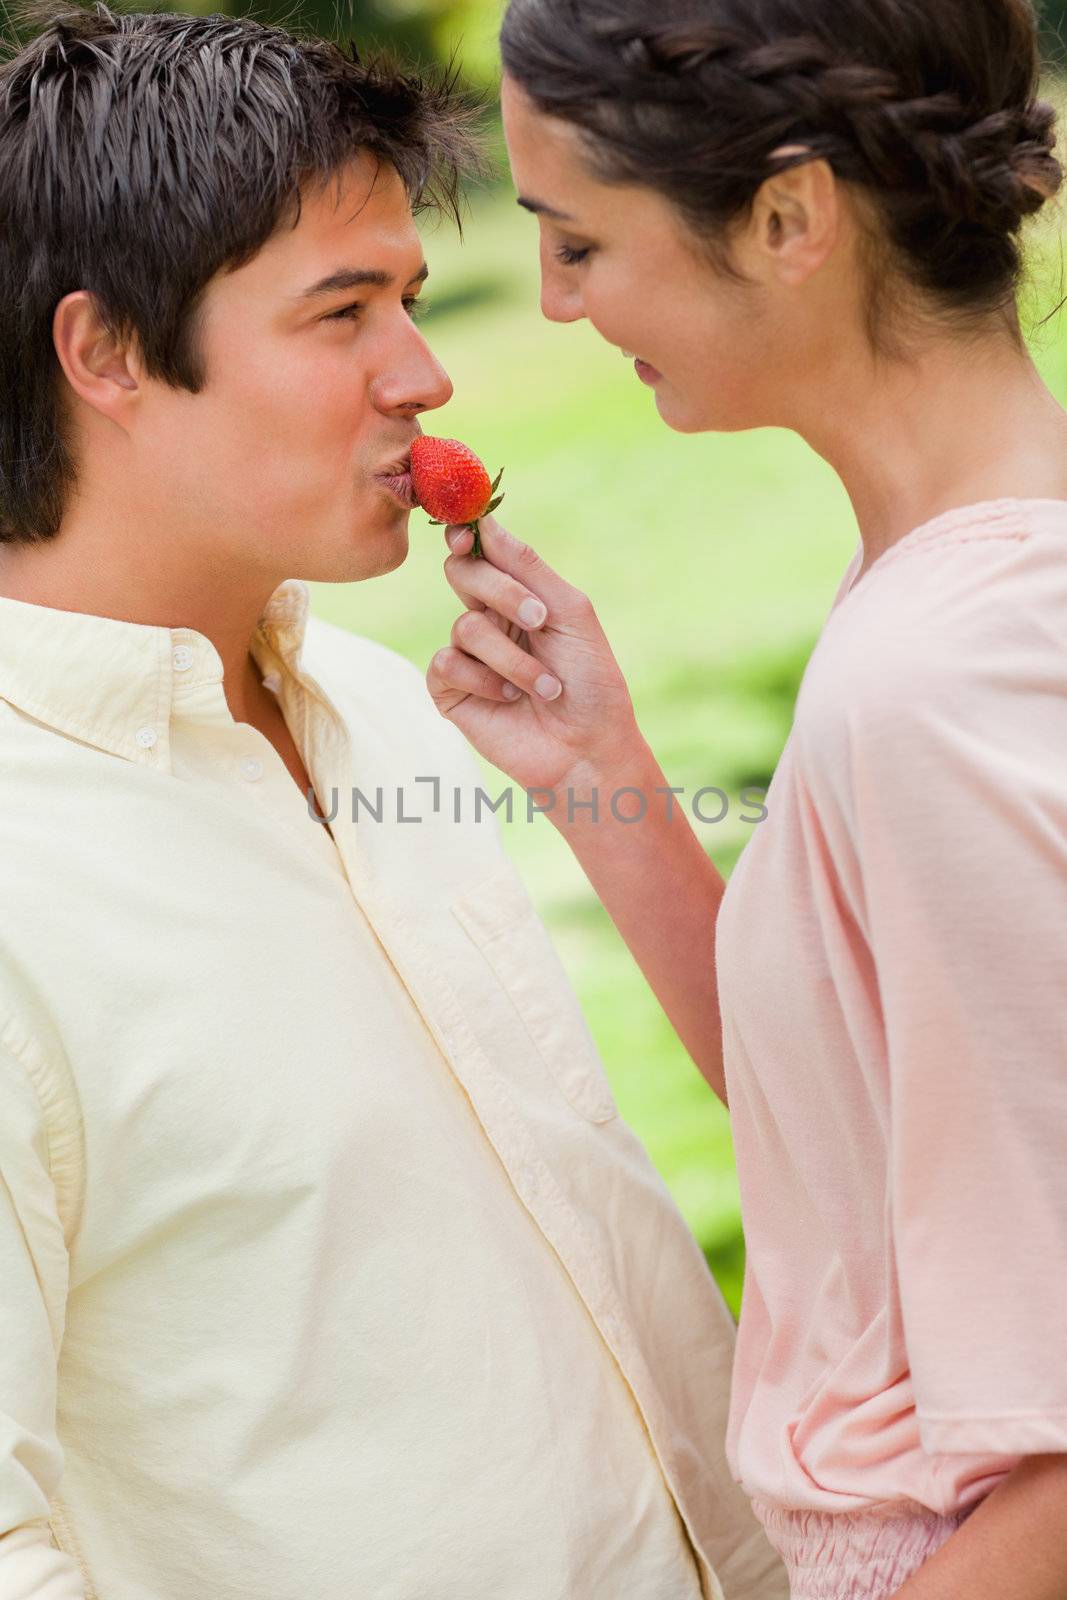 Woman smiles as she feeds her friend a strawberry in a park